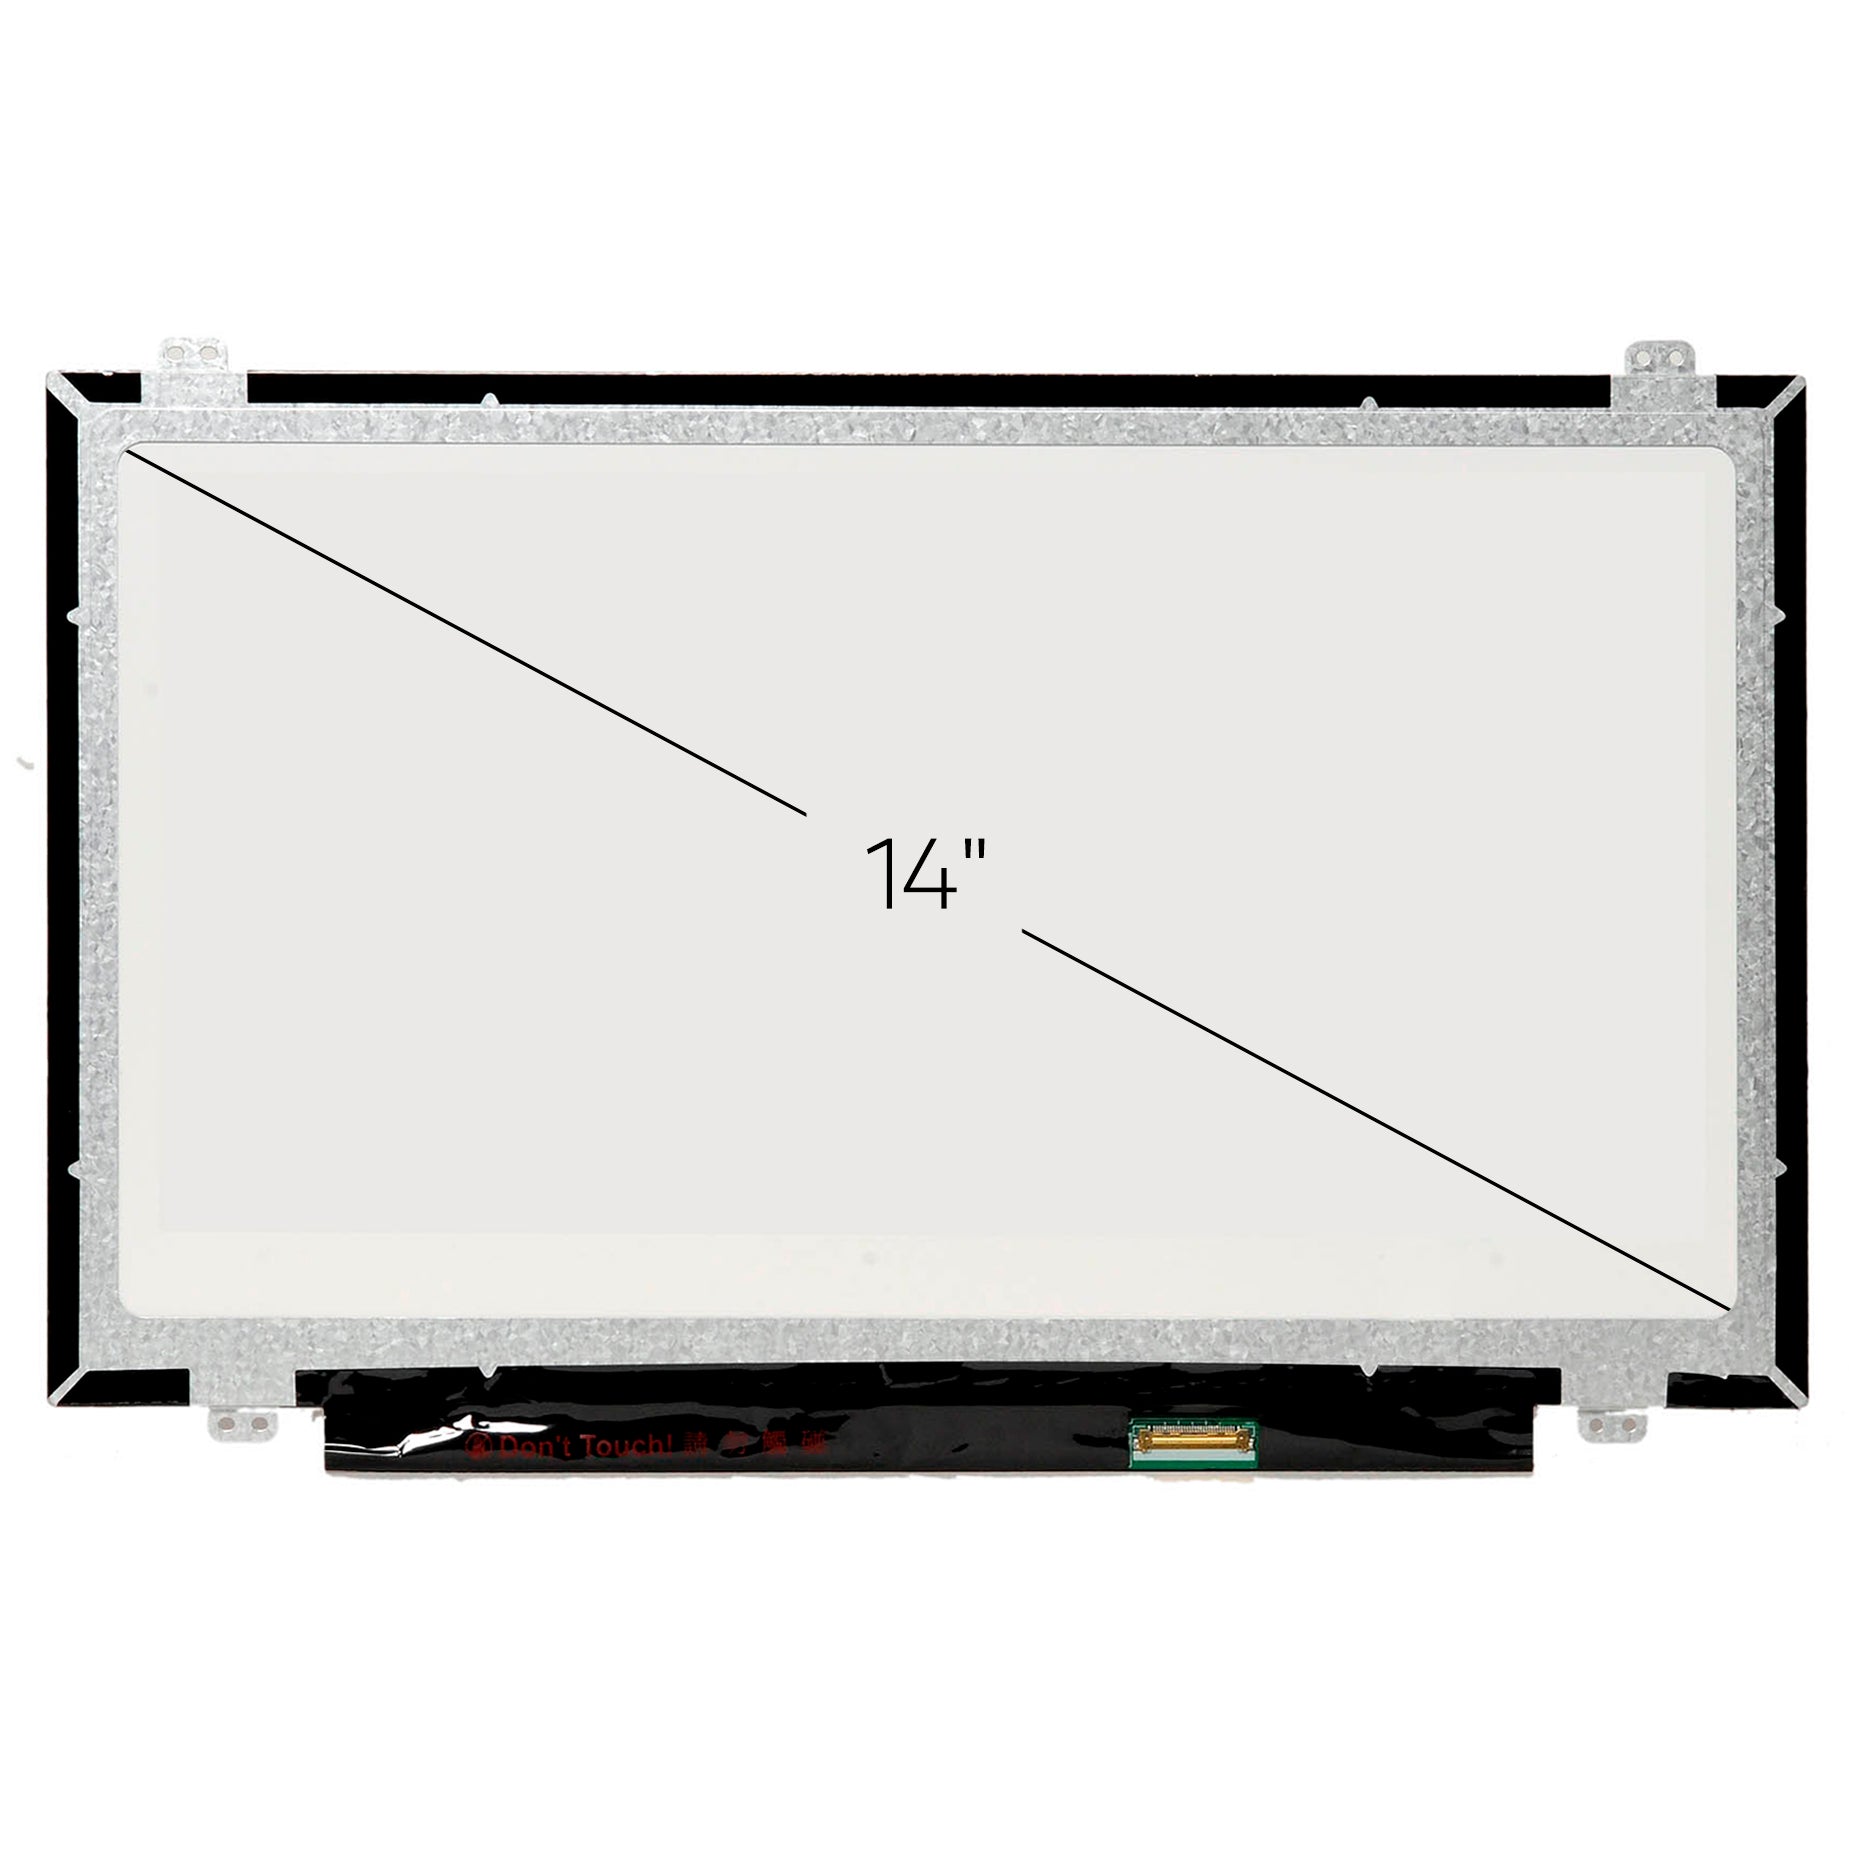 Screen Replacement for ASUS Vivobook E402NA HD 1366x768 Glossy LCD LED Display